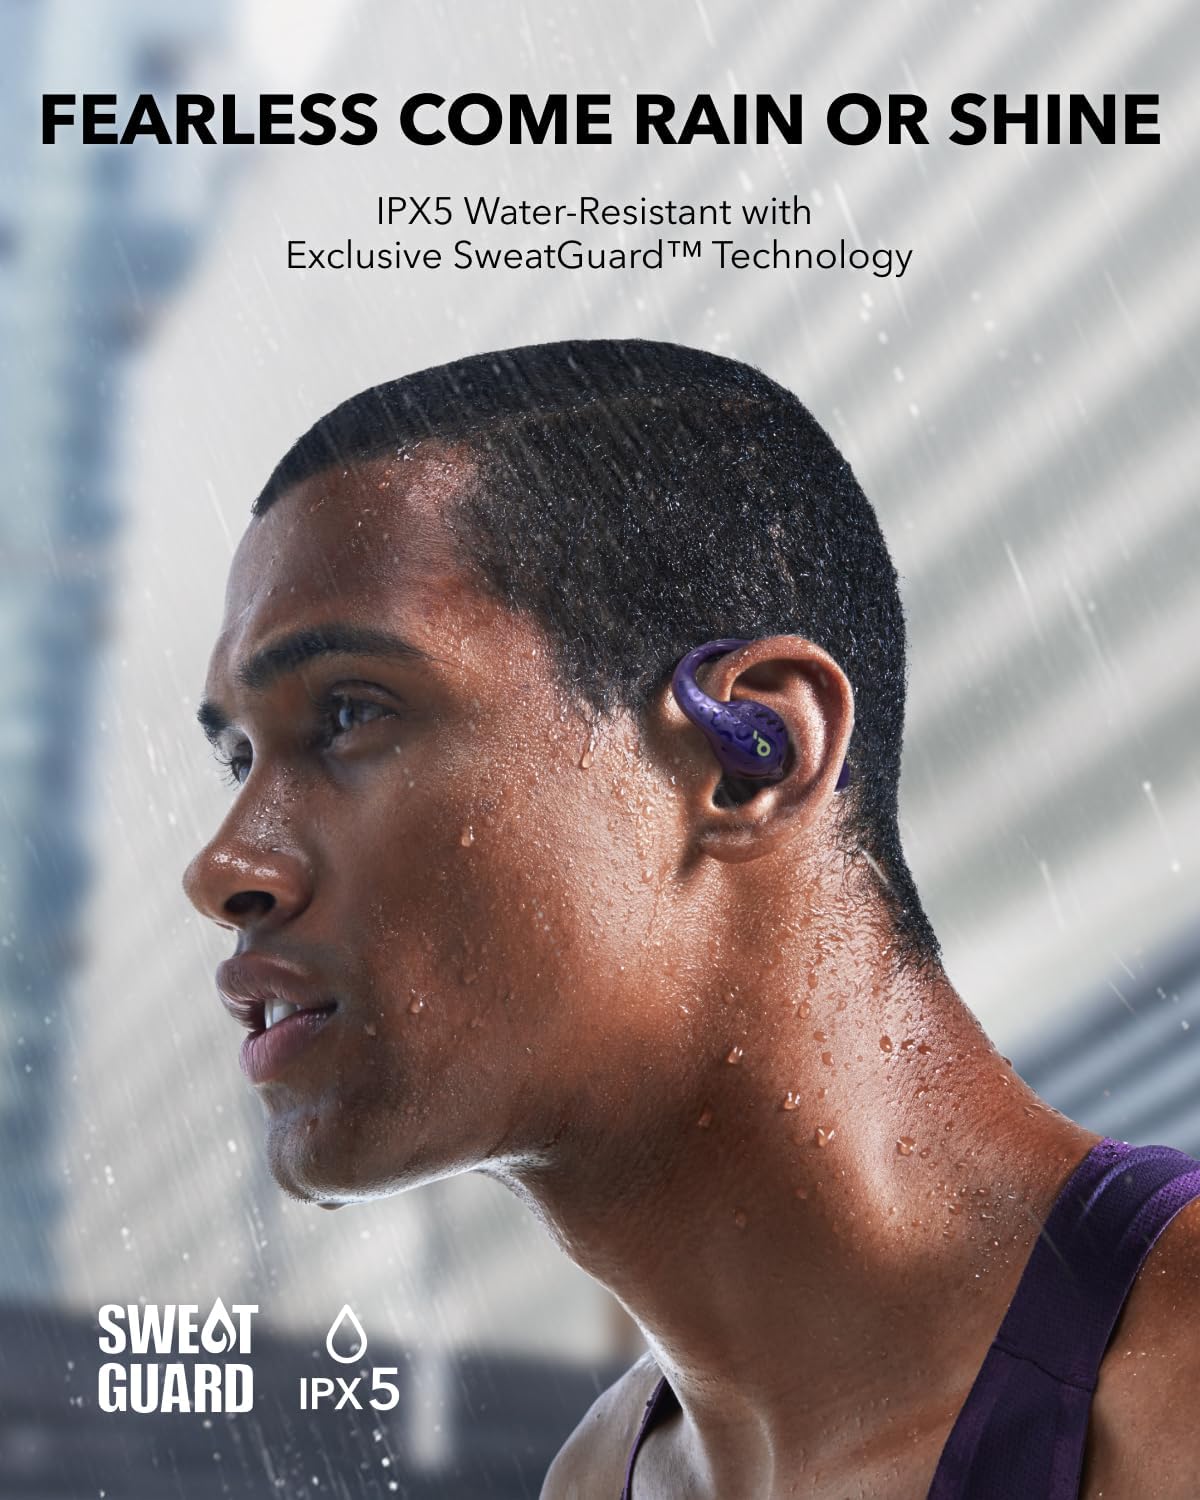 Soundcore by Anker AeroFit Pro Open-Ear Headphones, Ultra Comfort, Secure Fit, Ergonomic Design, Rich Sound with LDAC, Bluetooth 5.3, IPX5 Water-Resistant, 46H Playtime, App Control, Wireless Earbuds, Electric Purple